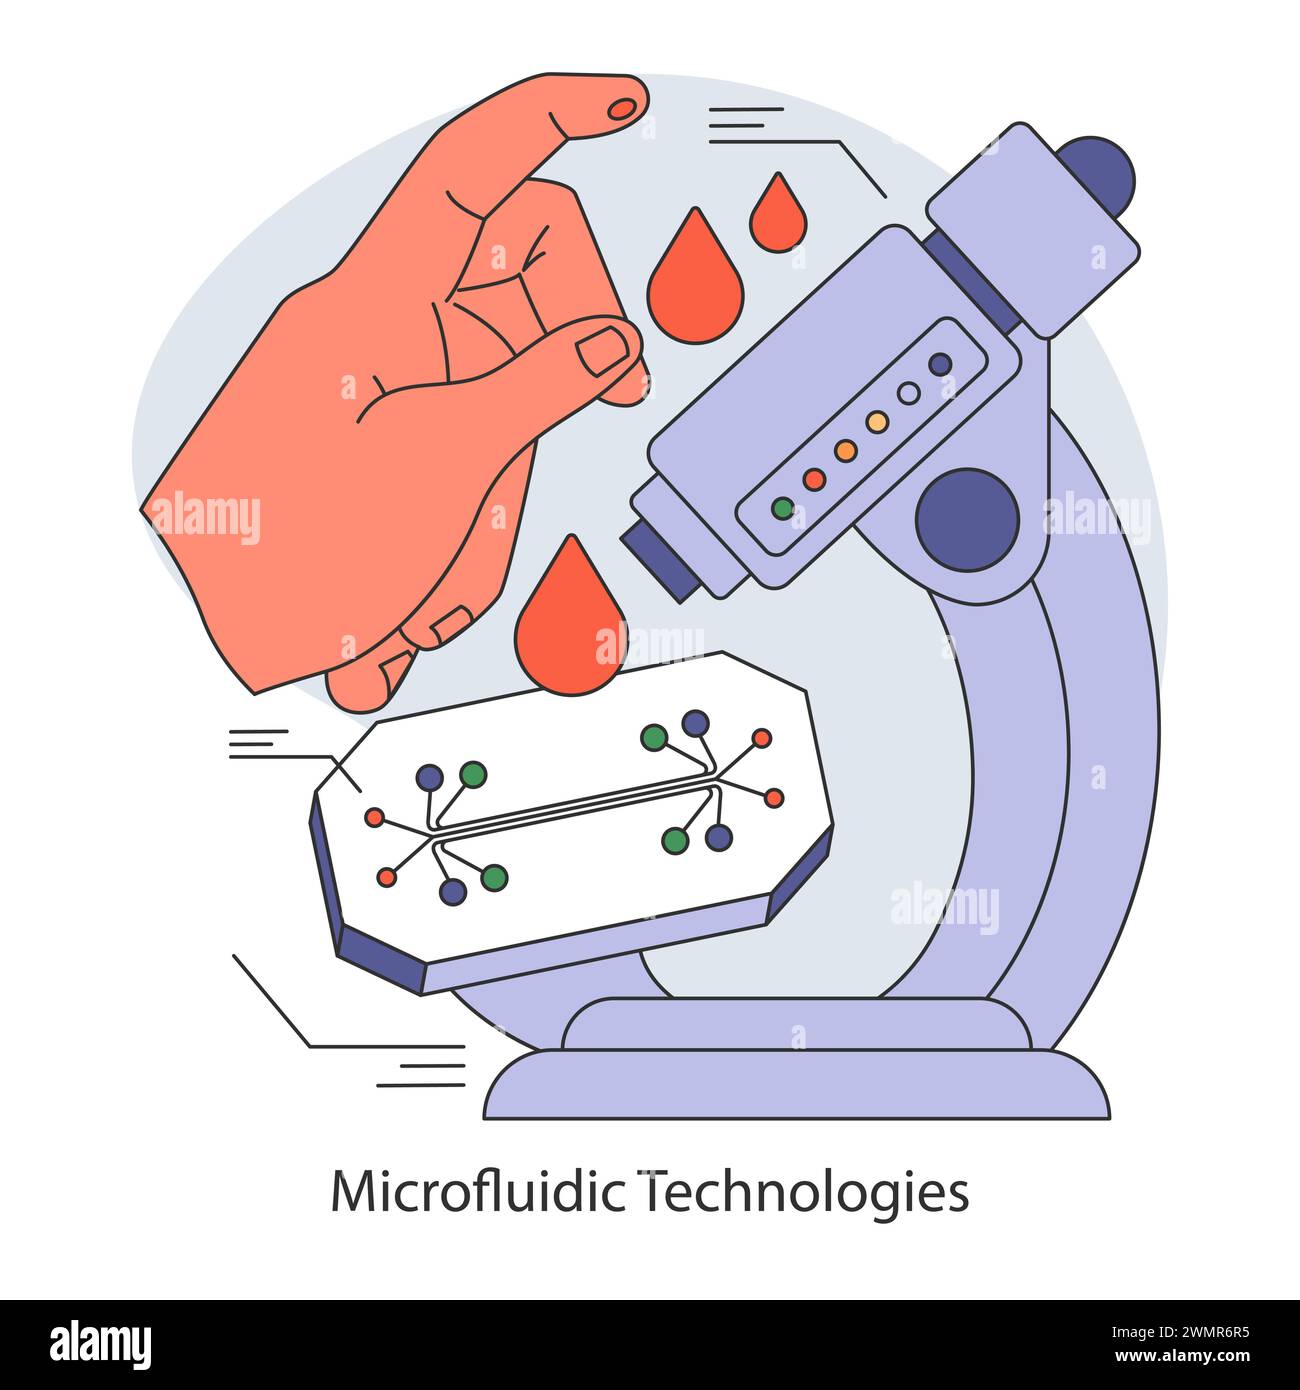 Microfluidic Technologies concept. Revolutionizing biological testing with lab-on-a-chip devices. Streamlining complex analyses in miniature scales. Flat vector illustration. Stock Vector